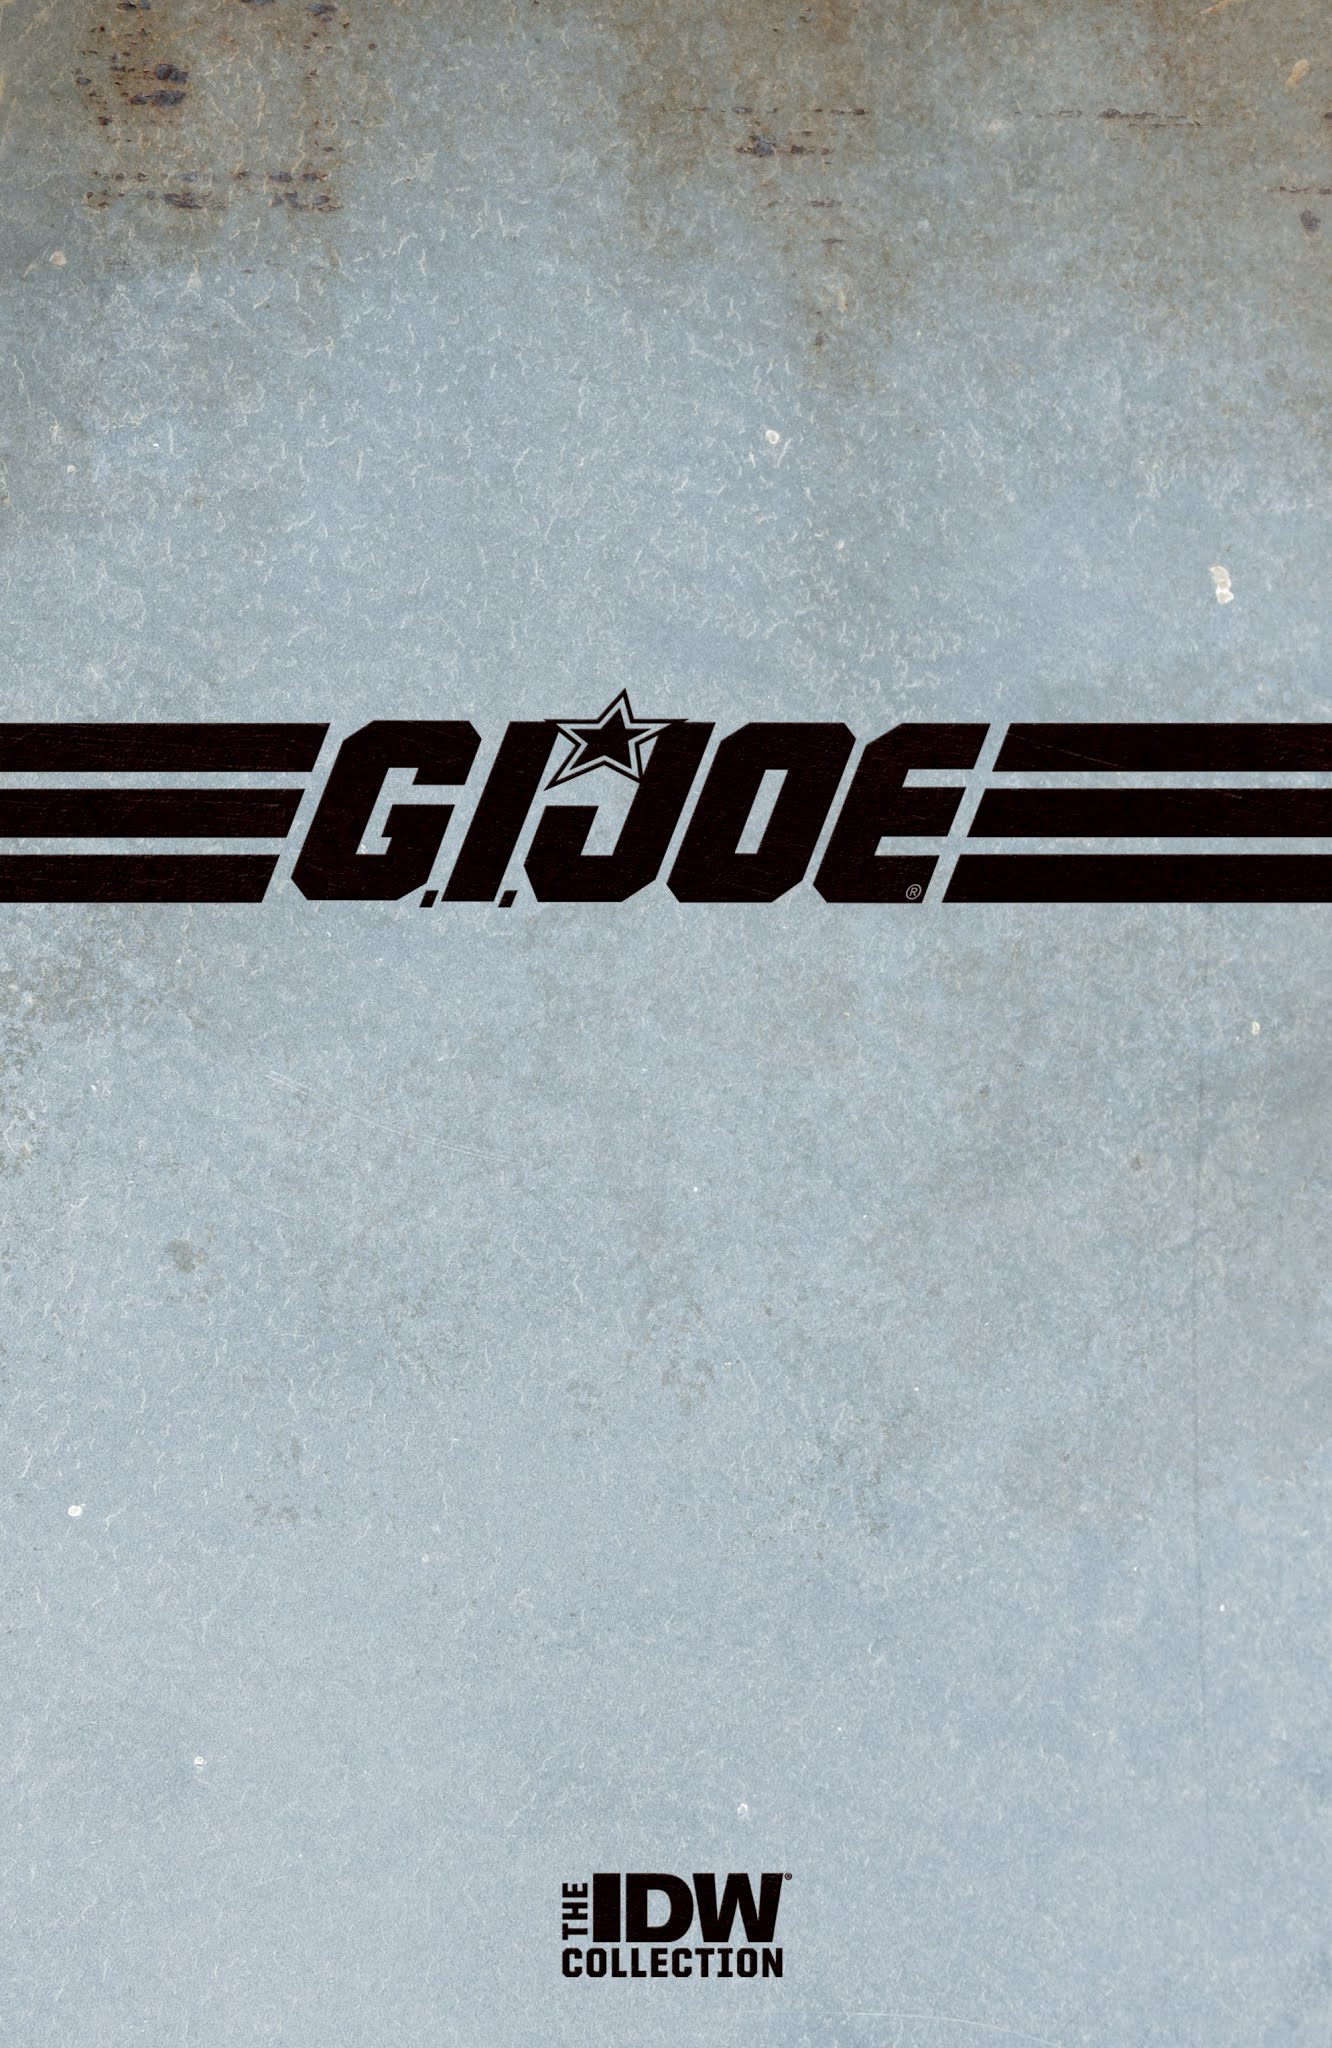 Read online G.I. Joe: The IDW Collection comic -  Issue # TPB 5 - 2